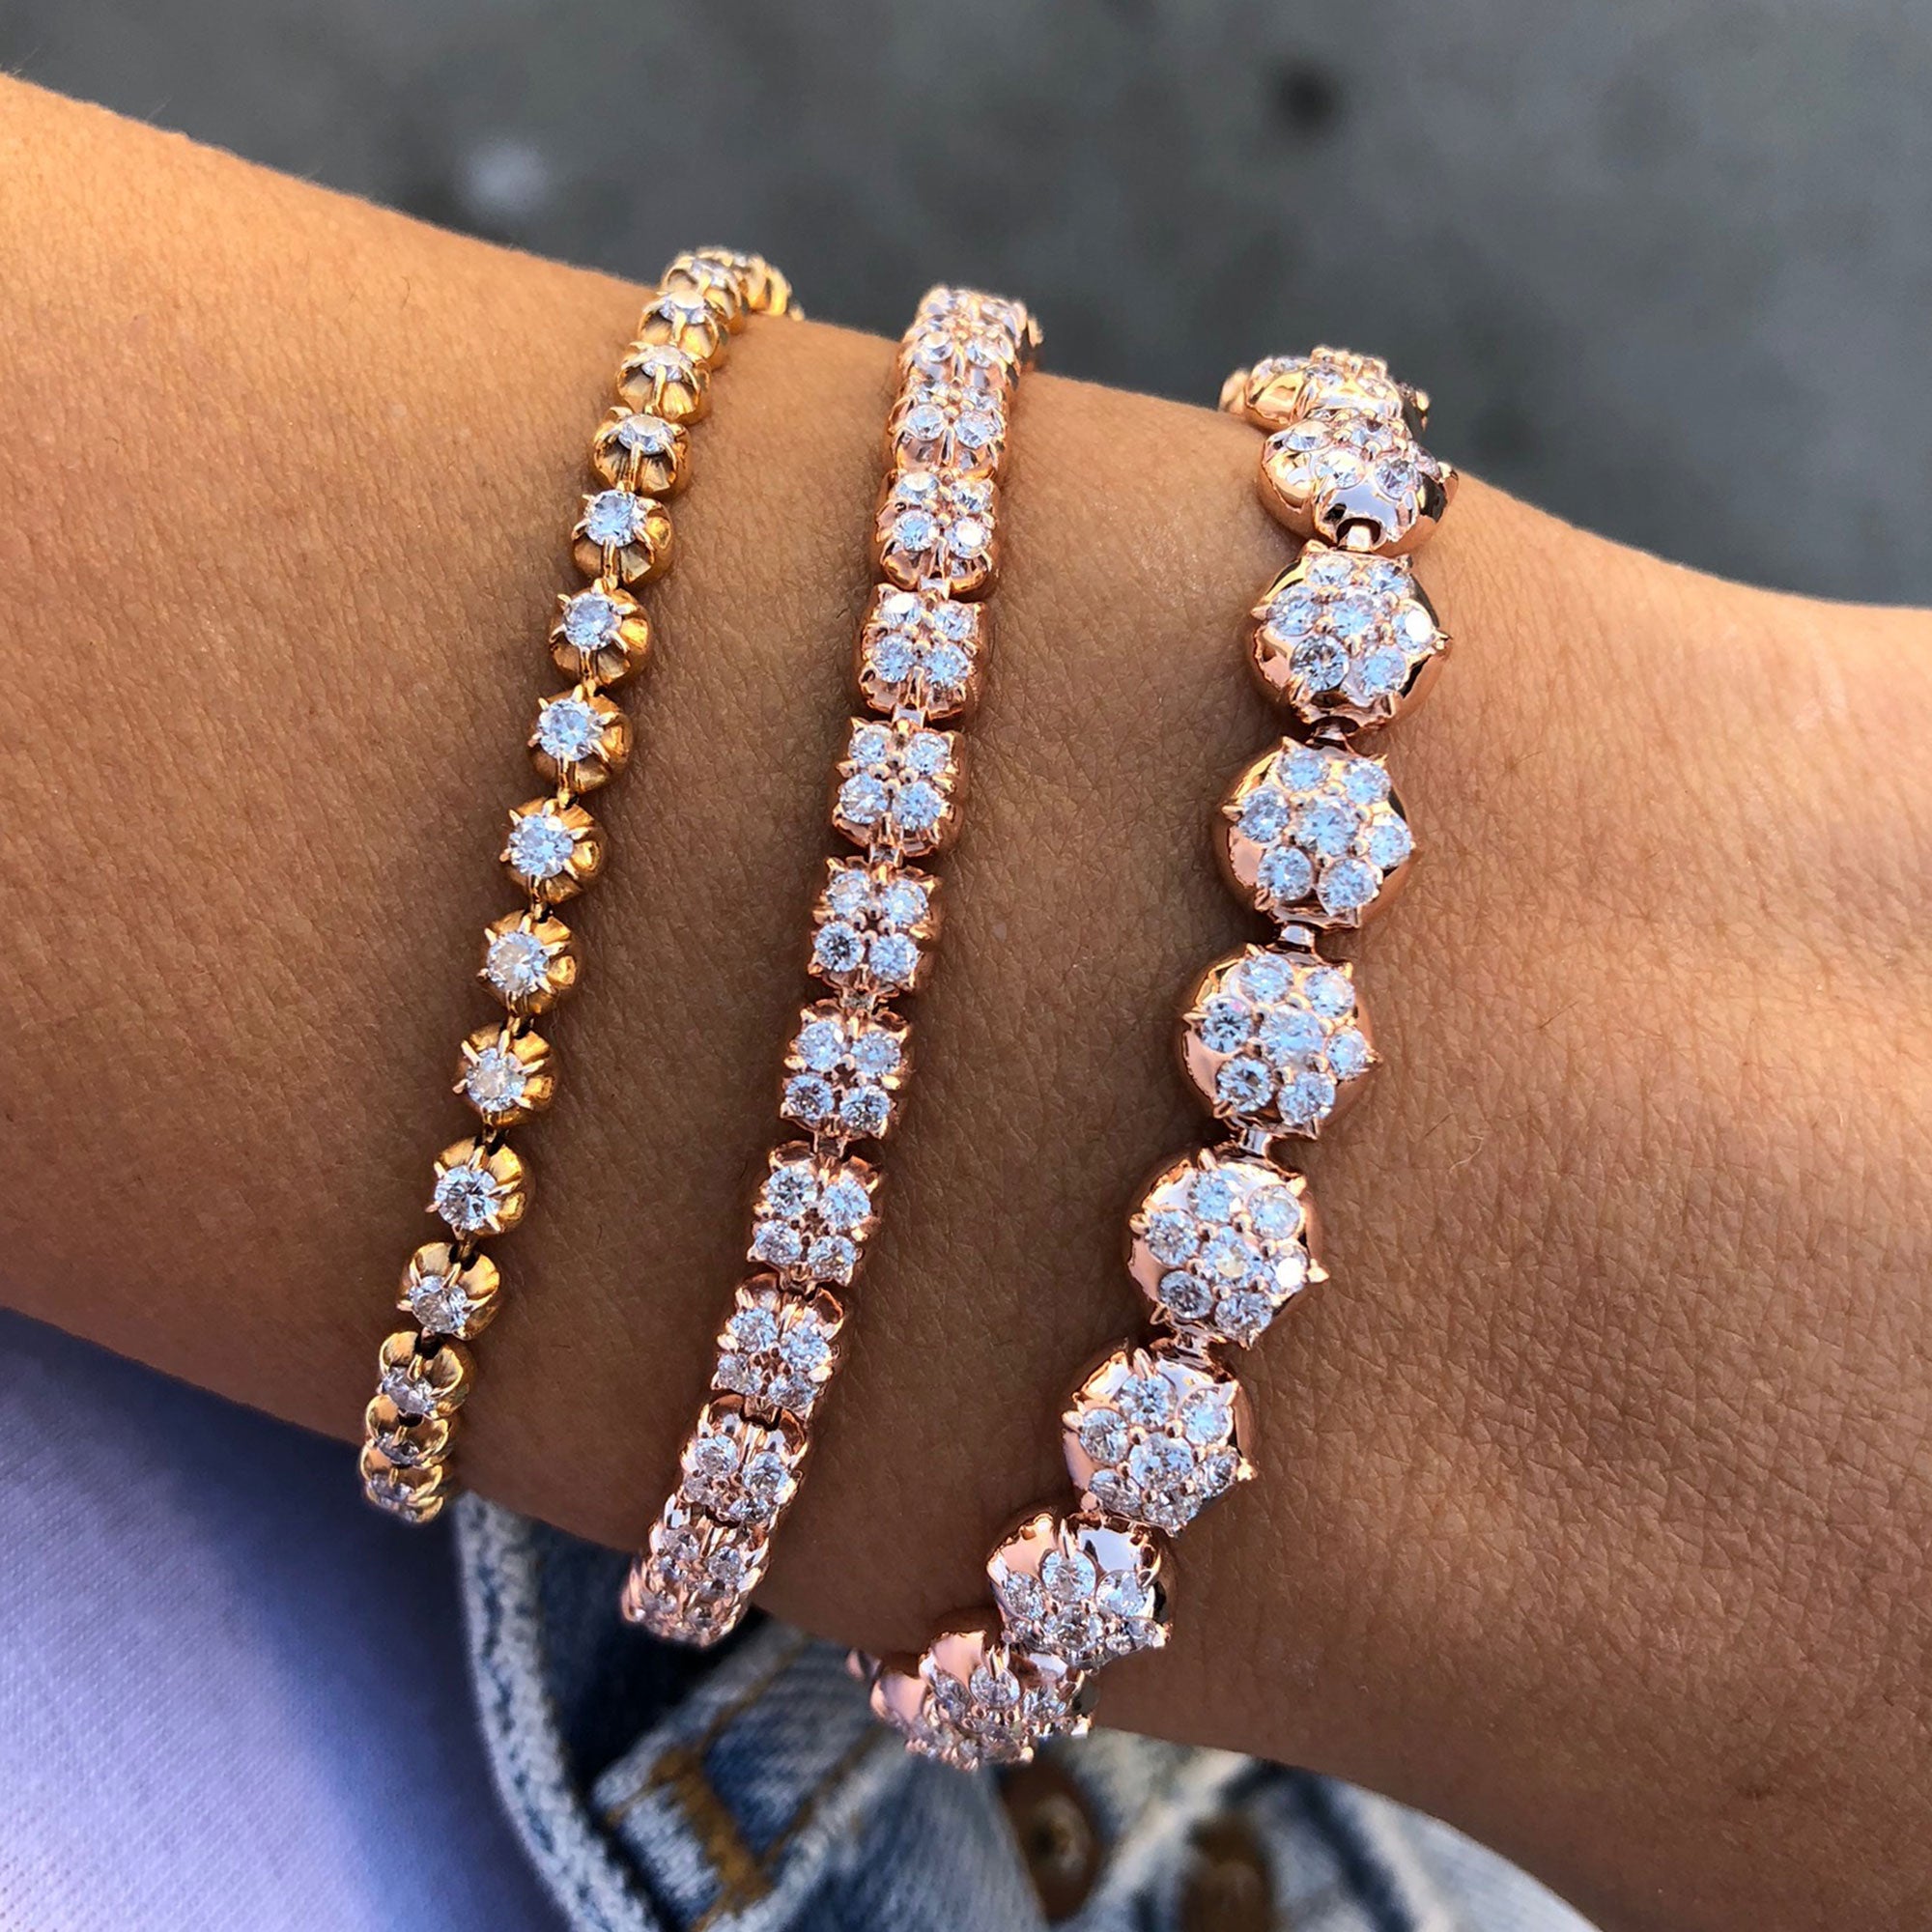 Trilogy Bracelet shown with our Crown Tennis Bracelet and Rosette Tennis Bracelet.